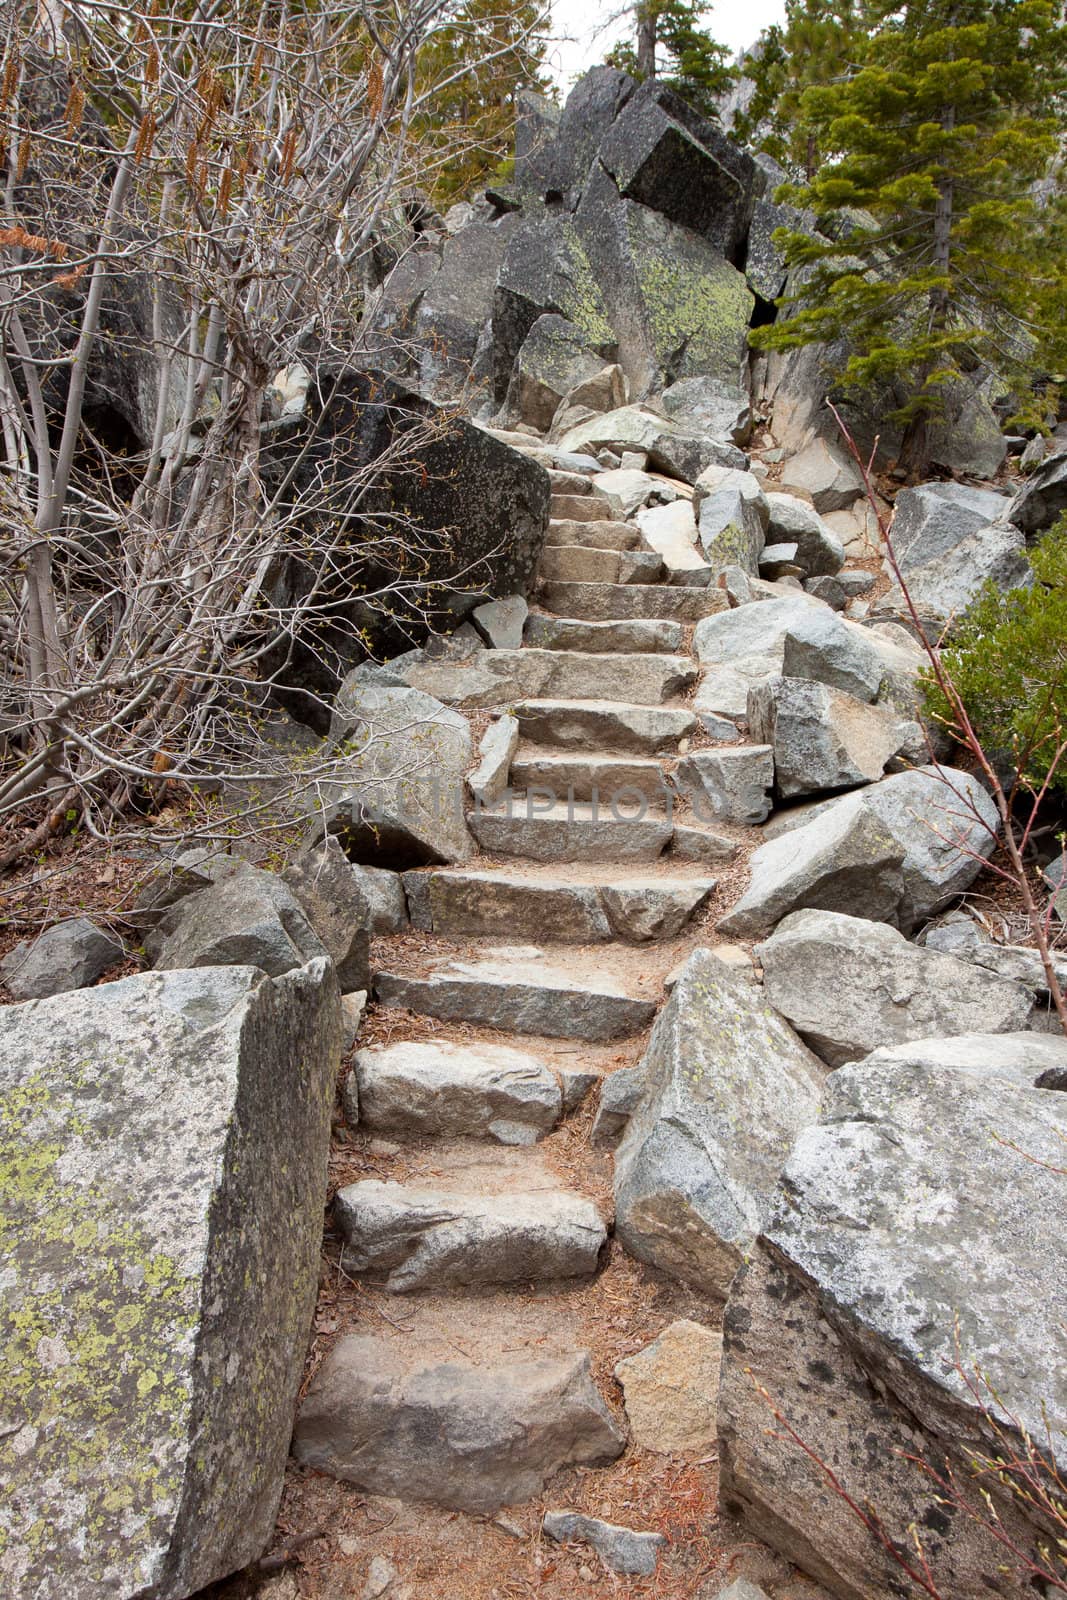 Stairs made up of rocks carved into the mountain at Lake Tahoe California.